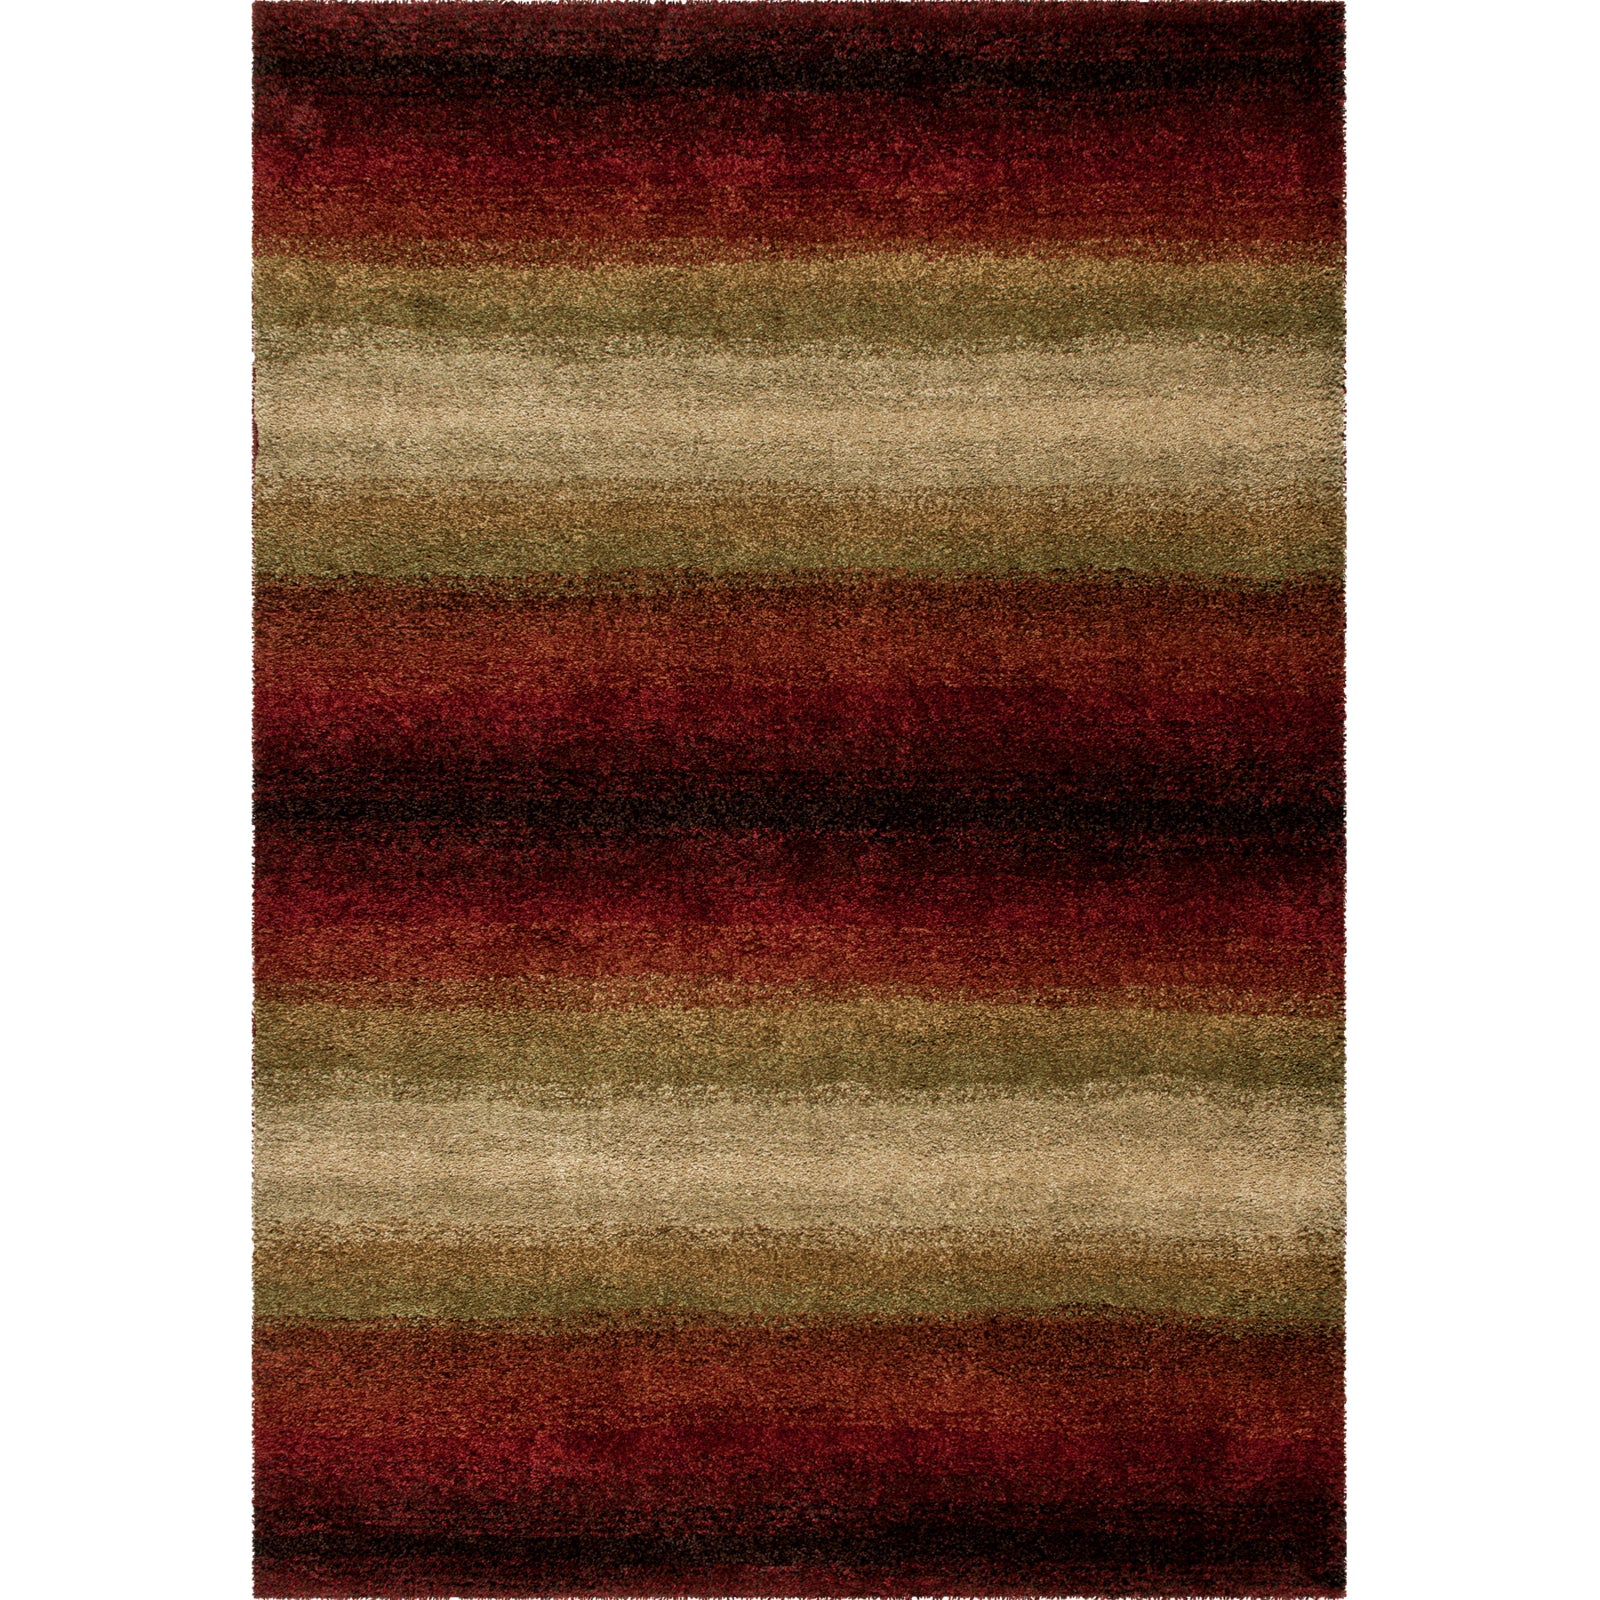 Orian Rugs Euphoria Connection Red Area Rug main image